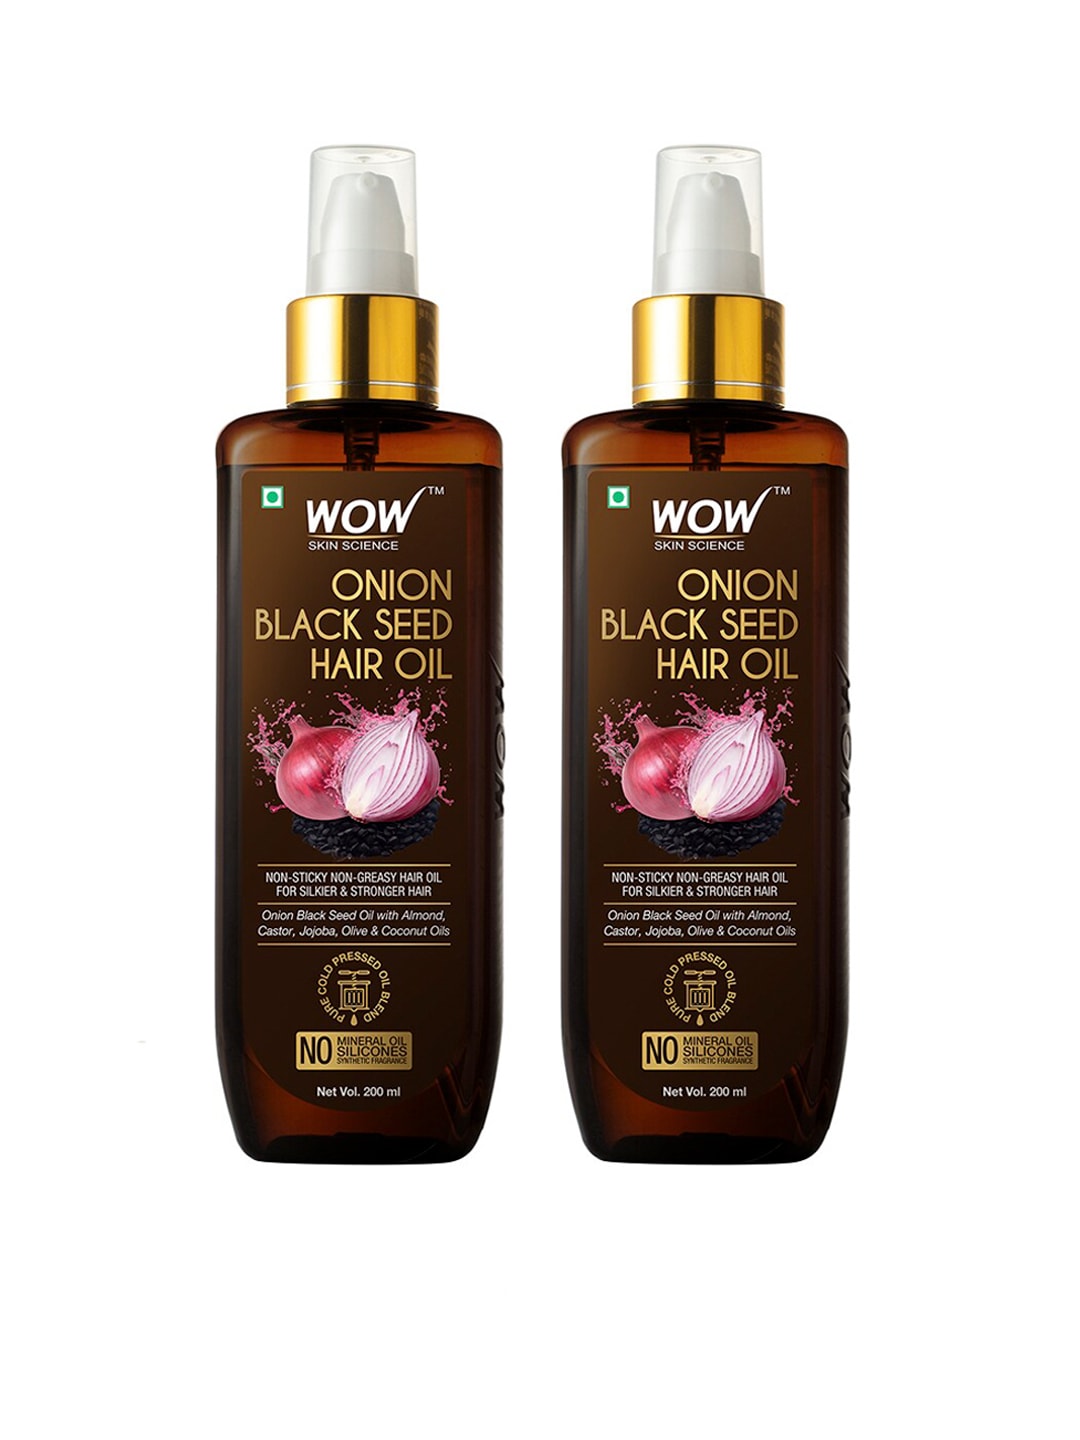 WOW SKIN SCIENCE Set of 2 Onion Black Seed Hair Oil Price in India